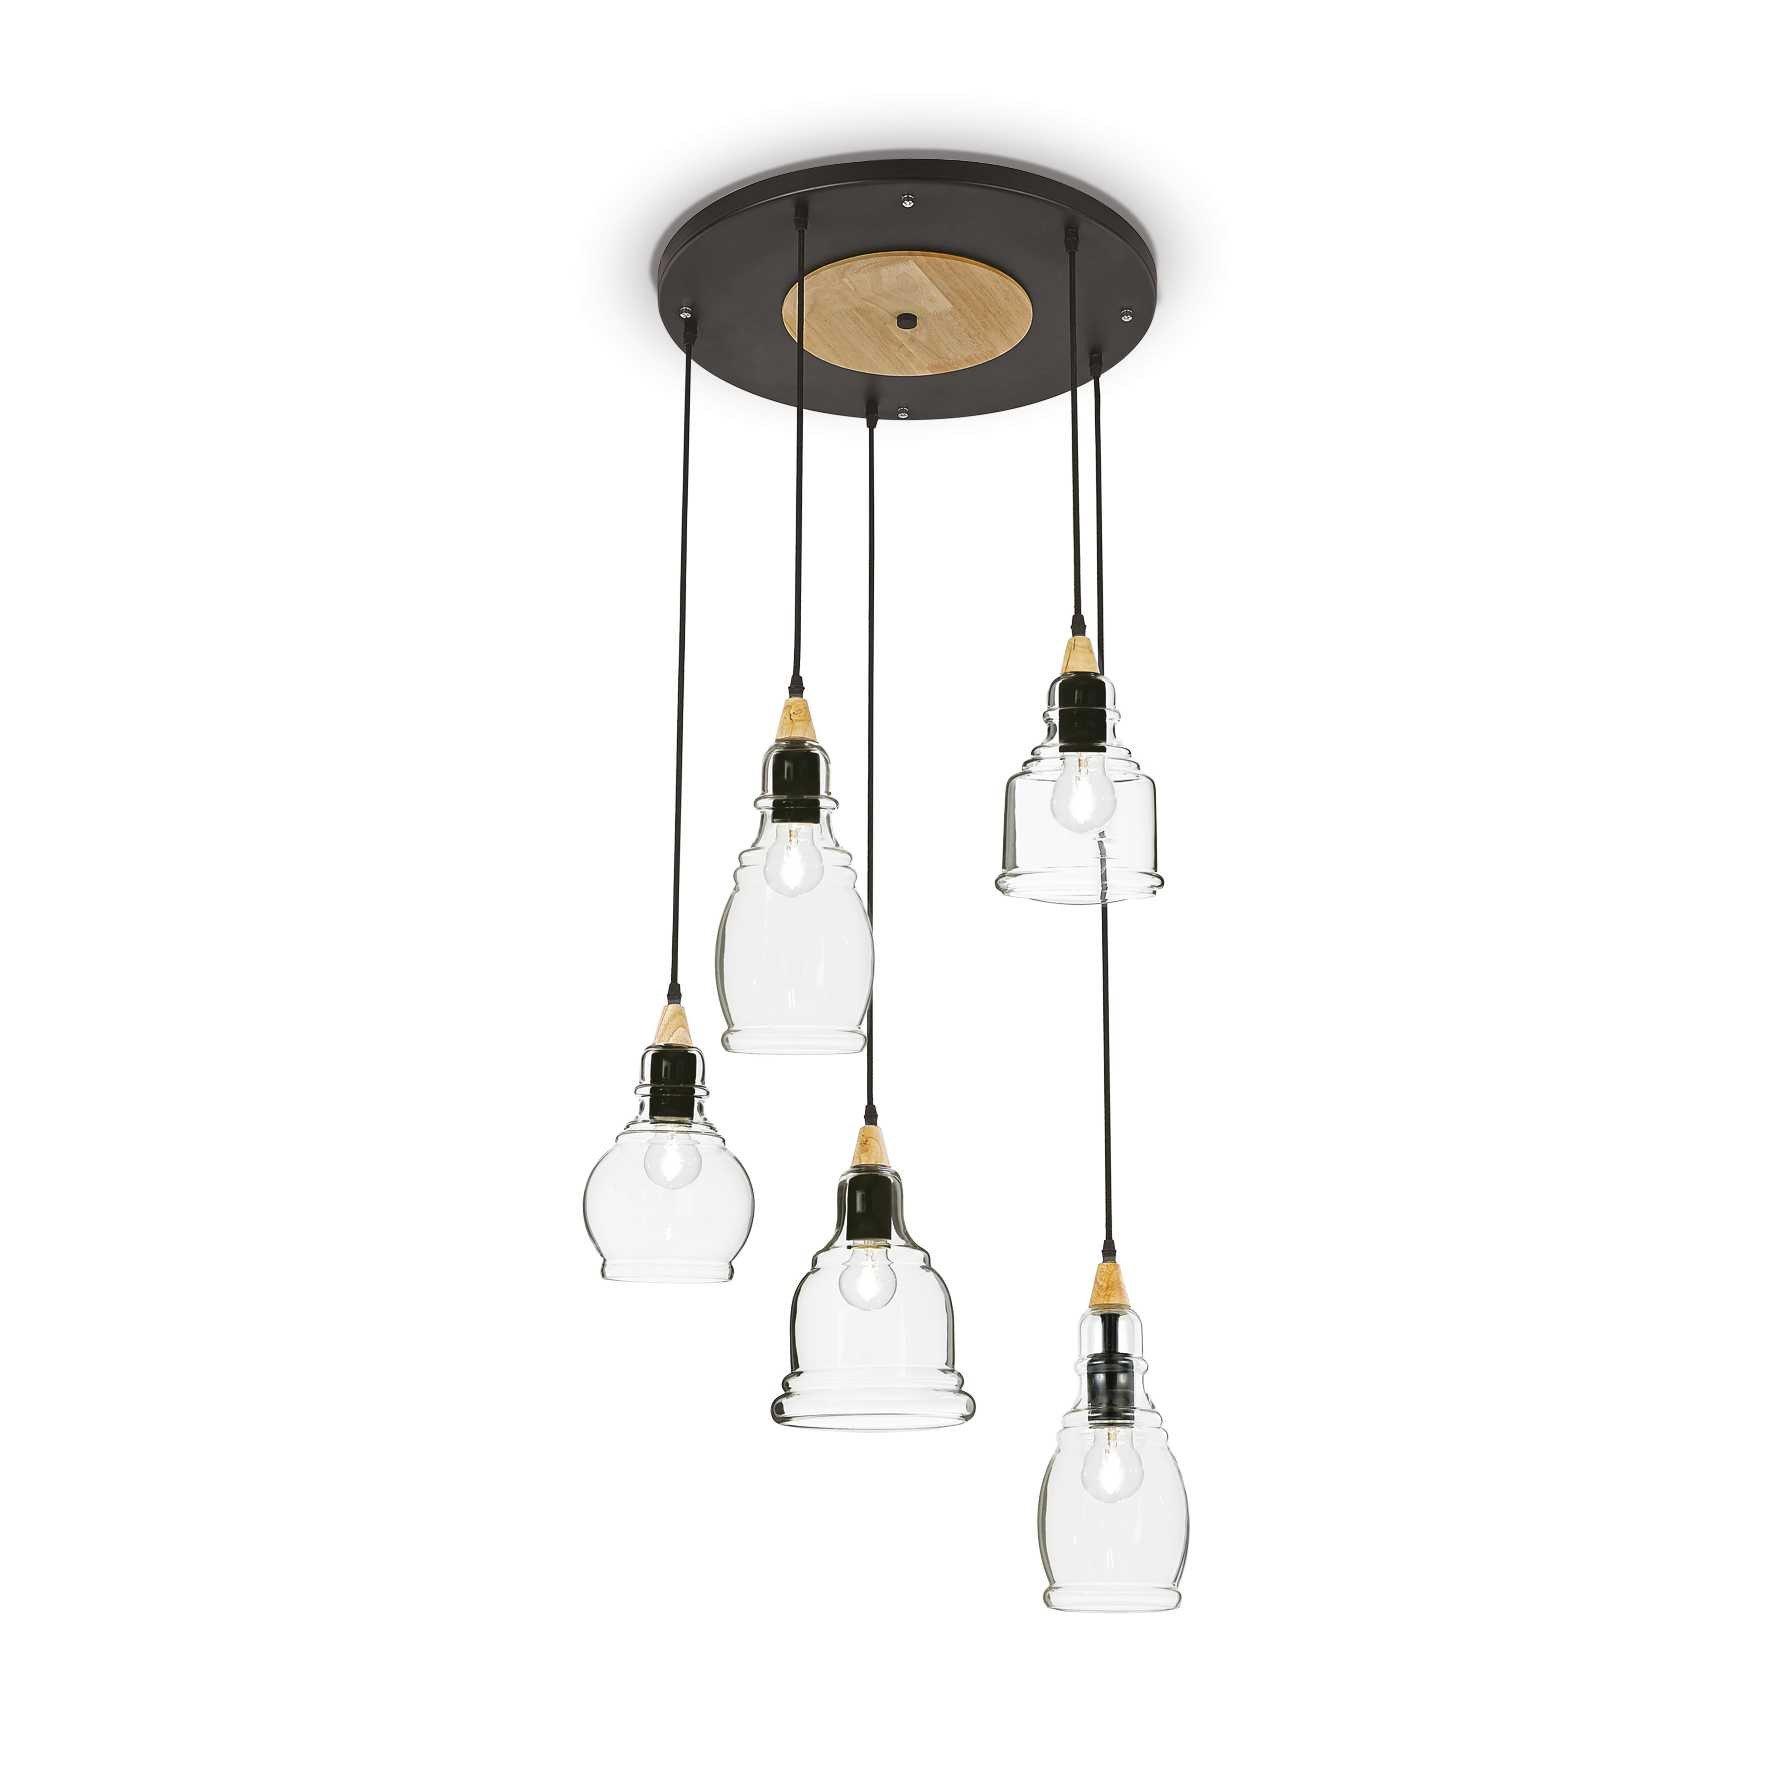 Gretel 5 Light Cluster Pendant Black with Clear Glass Shades E27